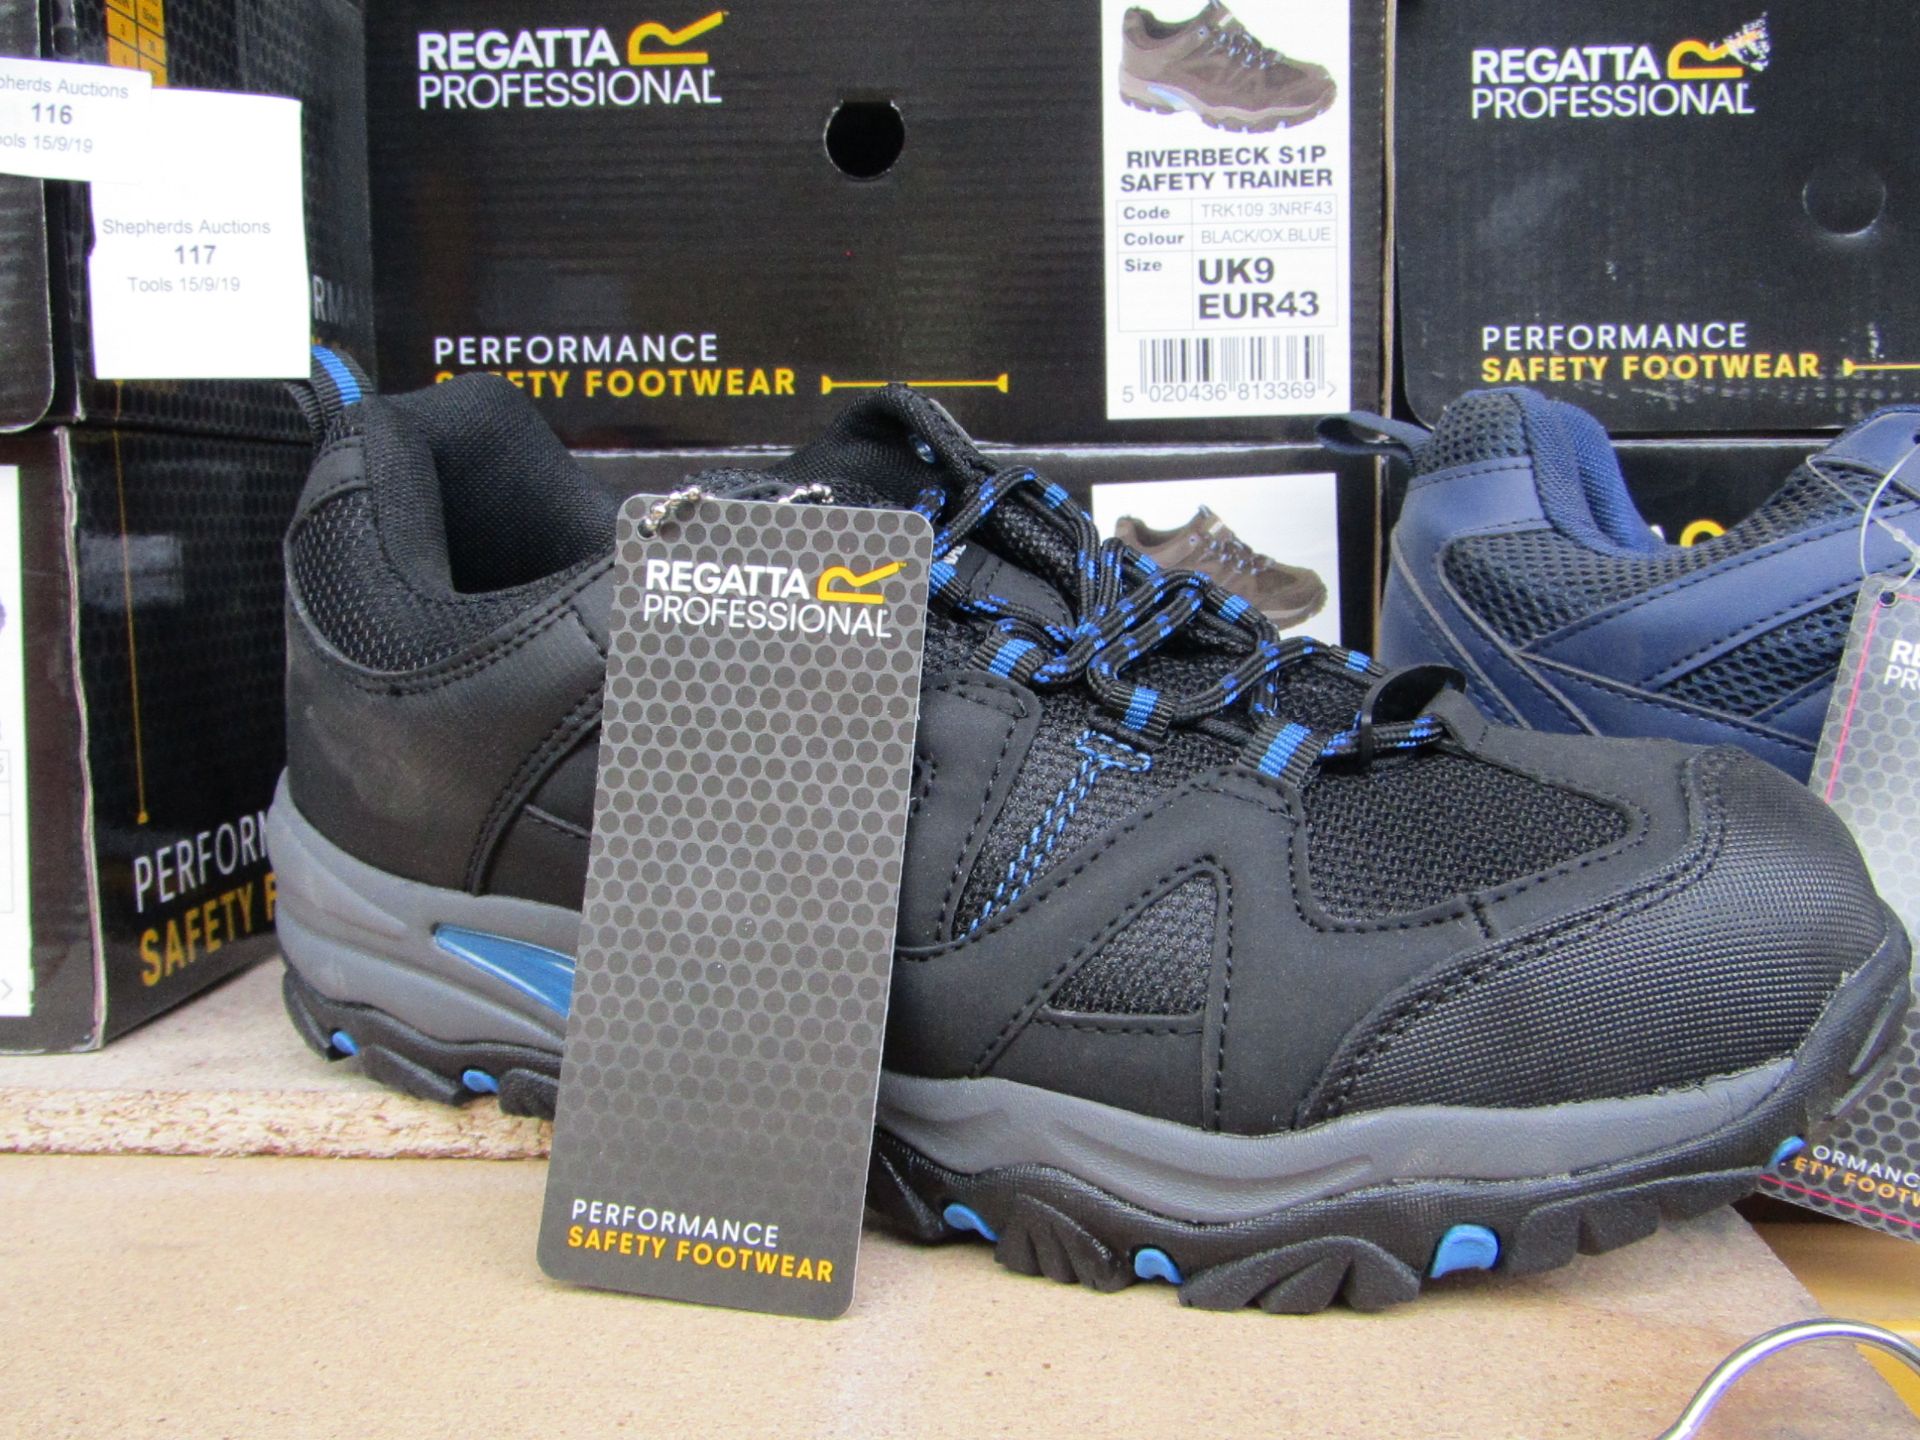 Regatta Professional Riverbeck S1P Safety Trainer. Size 8, EUR 42. New and boxed